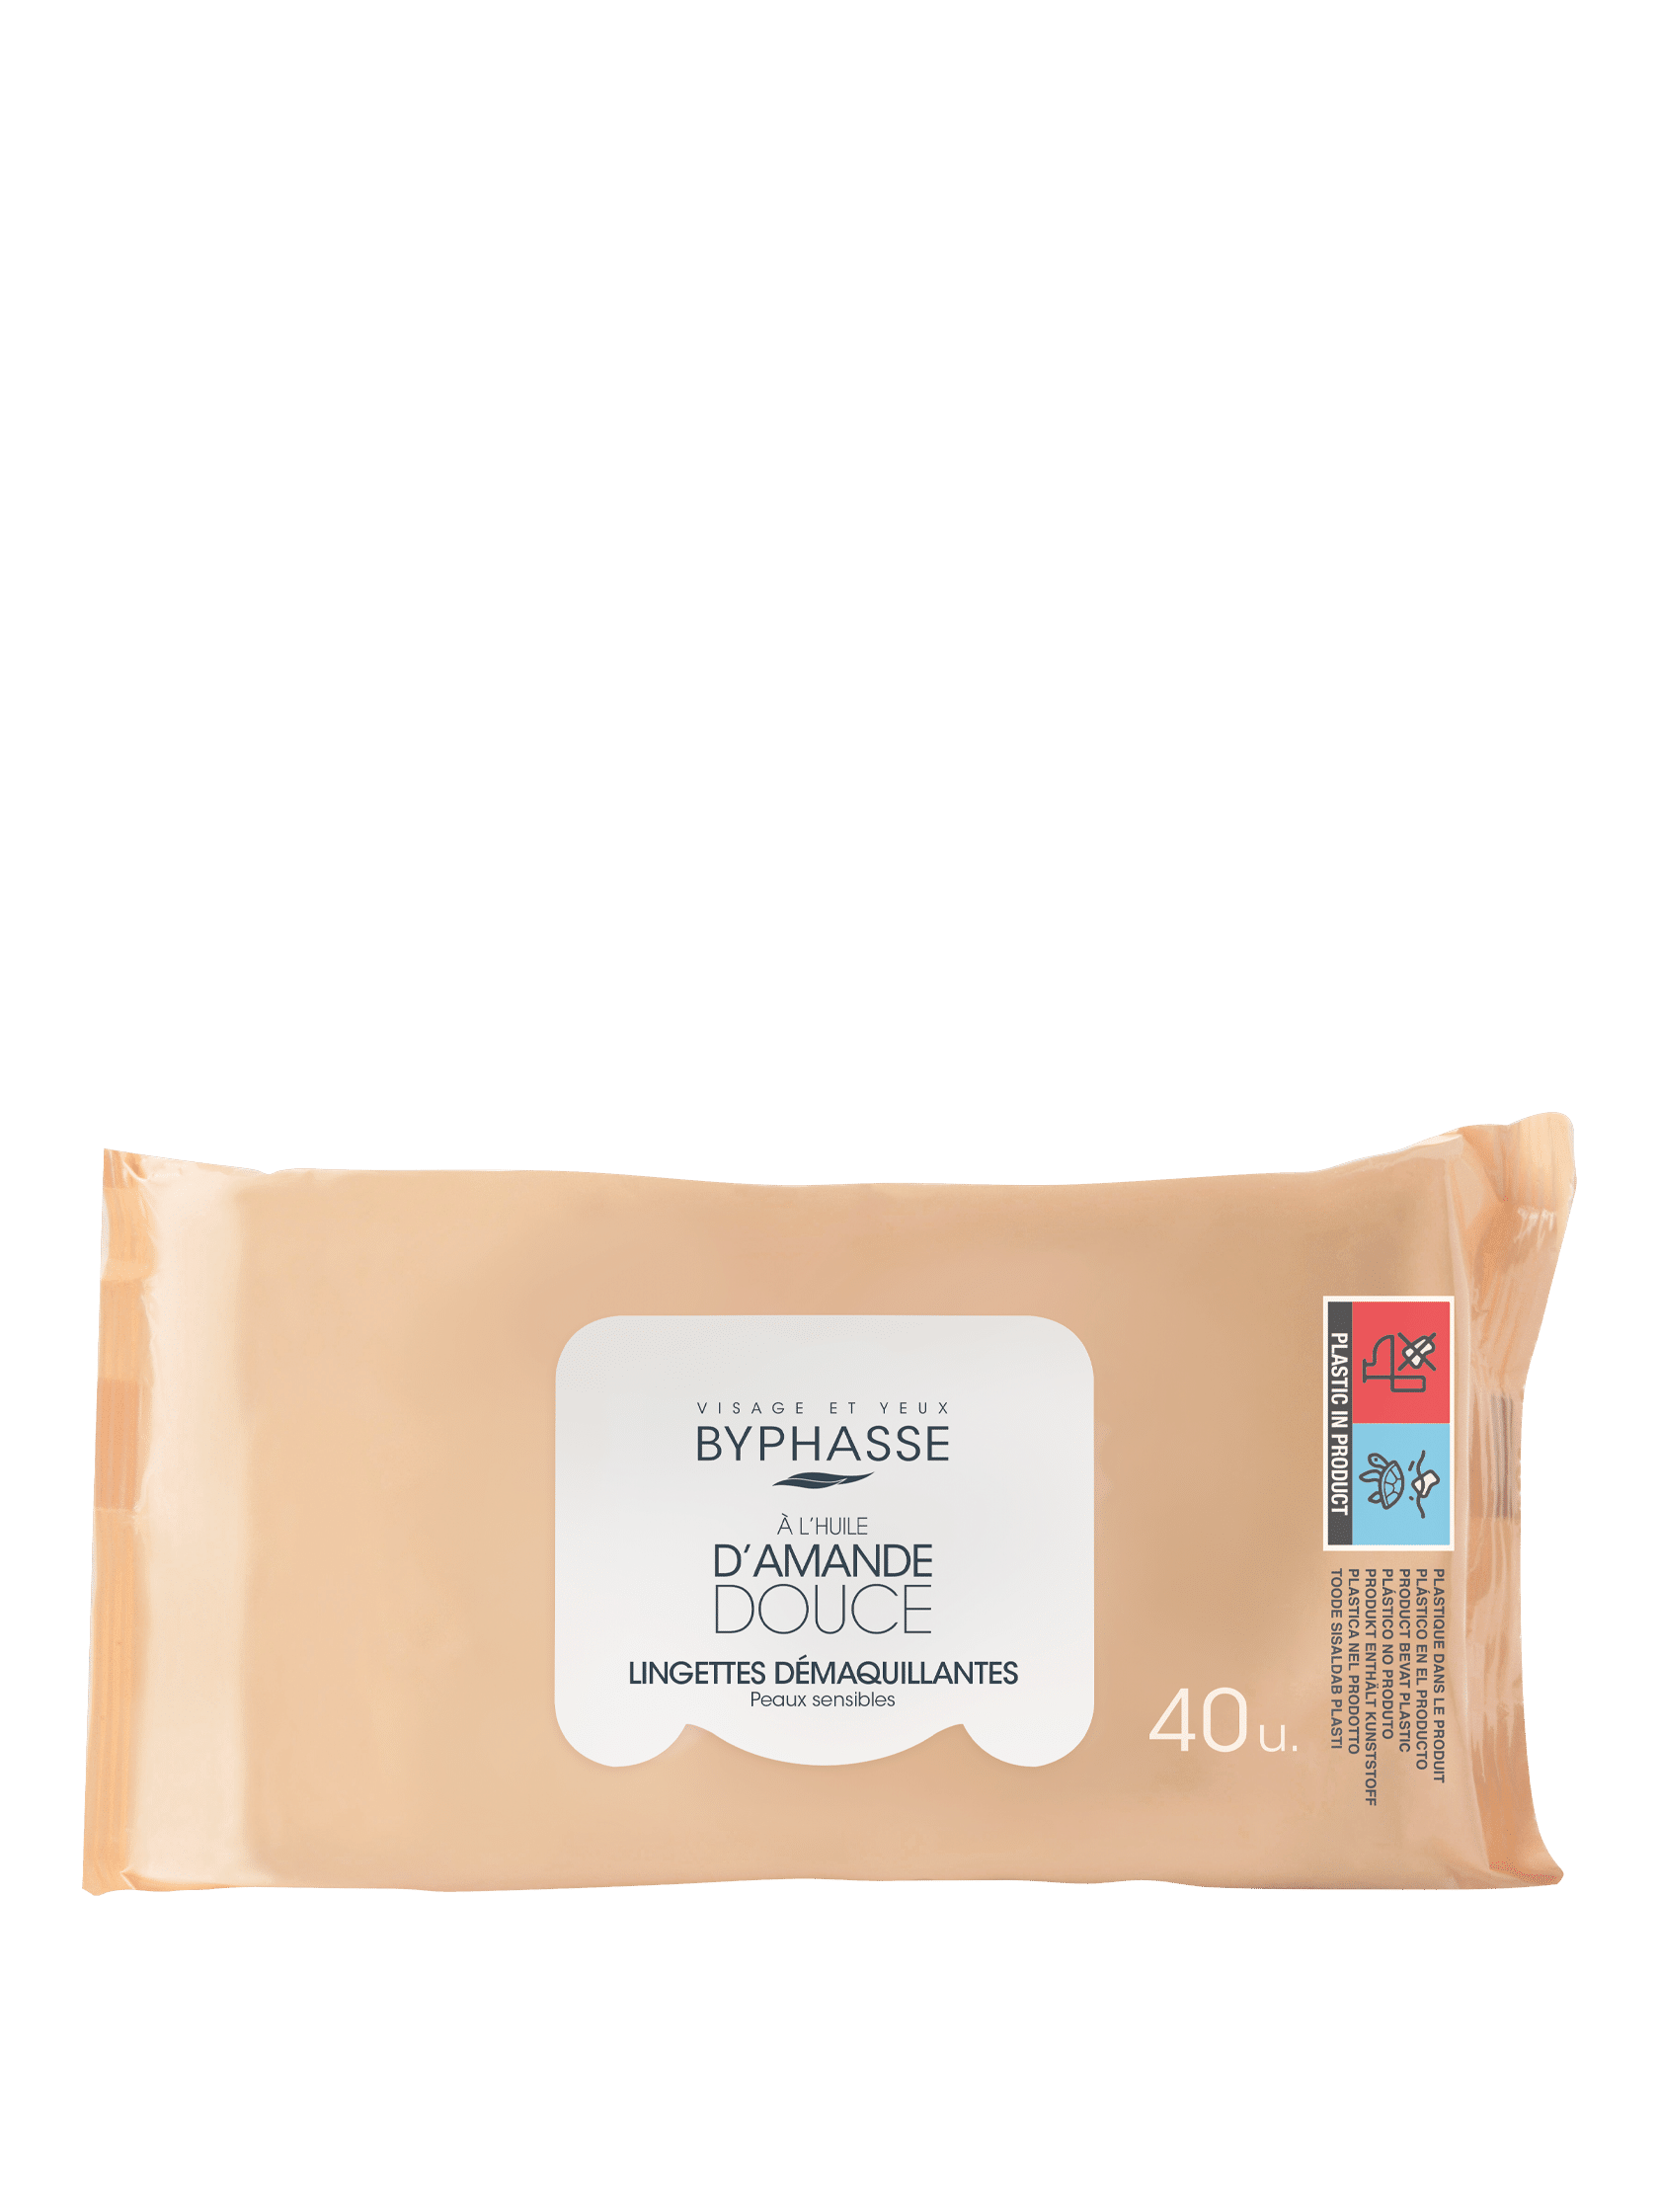 https://byphasse.com/wp-content/uploads/2023/11/MAKE-UP-REMOVER-WIPES-SWEET-ALMOND-OIL-SENSITIVE-SKIN-40U.-PRODUCT-NO-SAHDOW-1.png